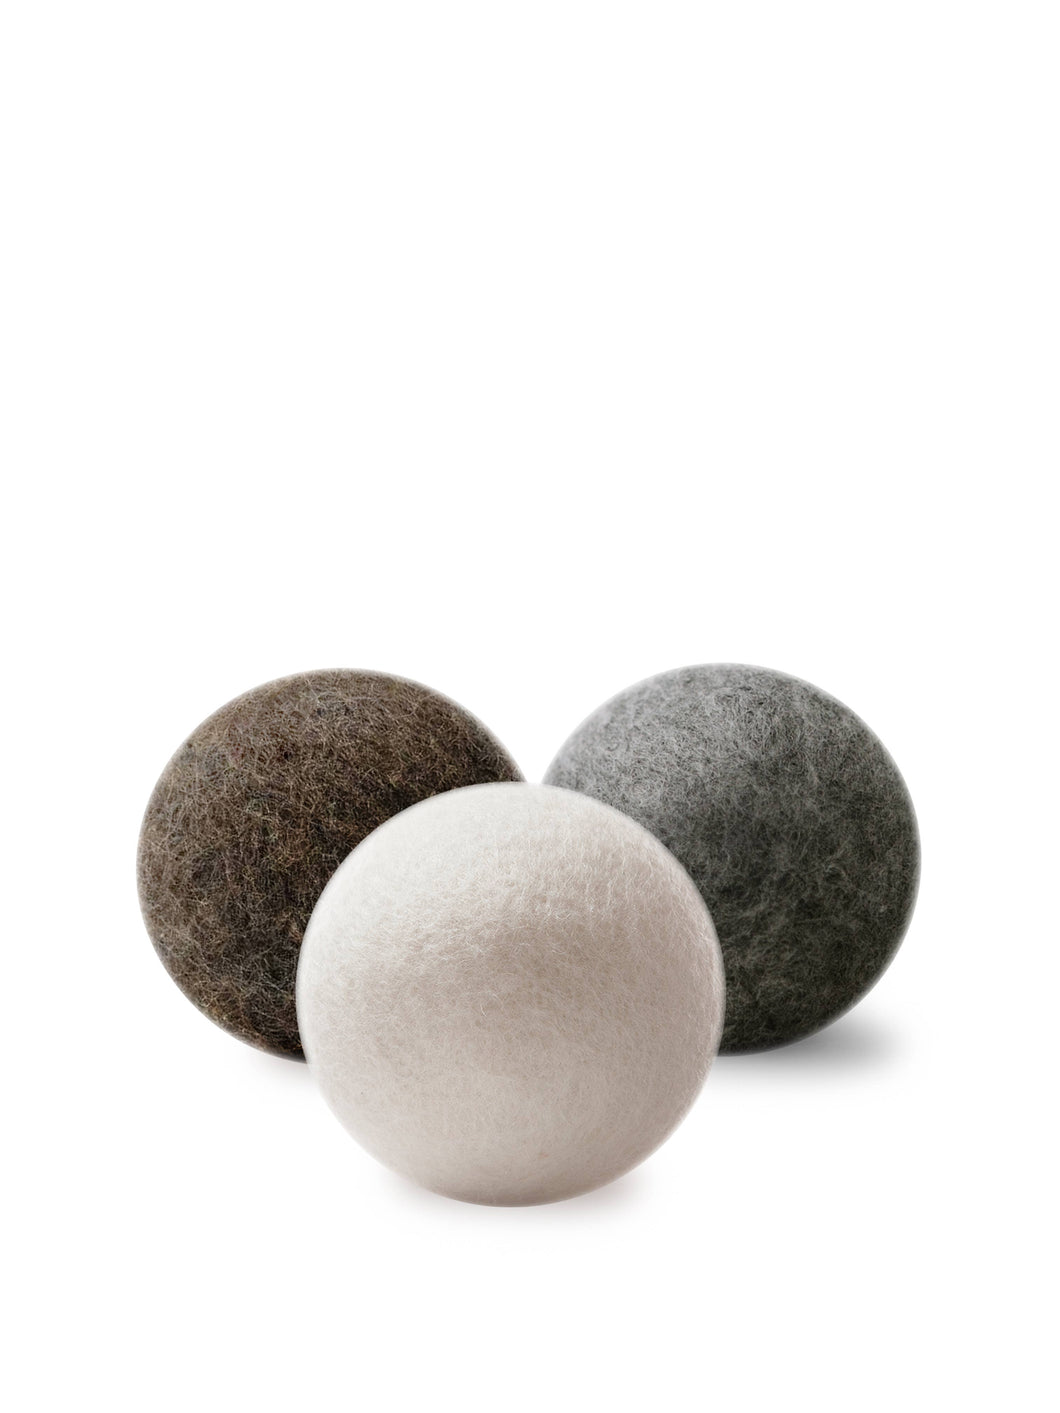 Wool Dryer Balls - Wht, Gry, Brn set of 3 in laundry bag.